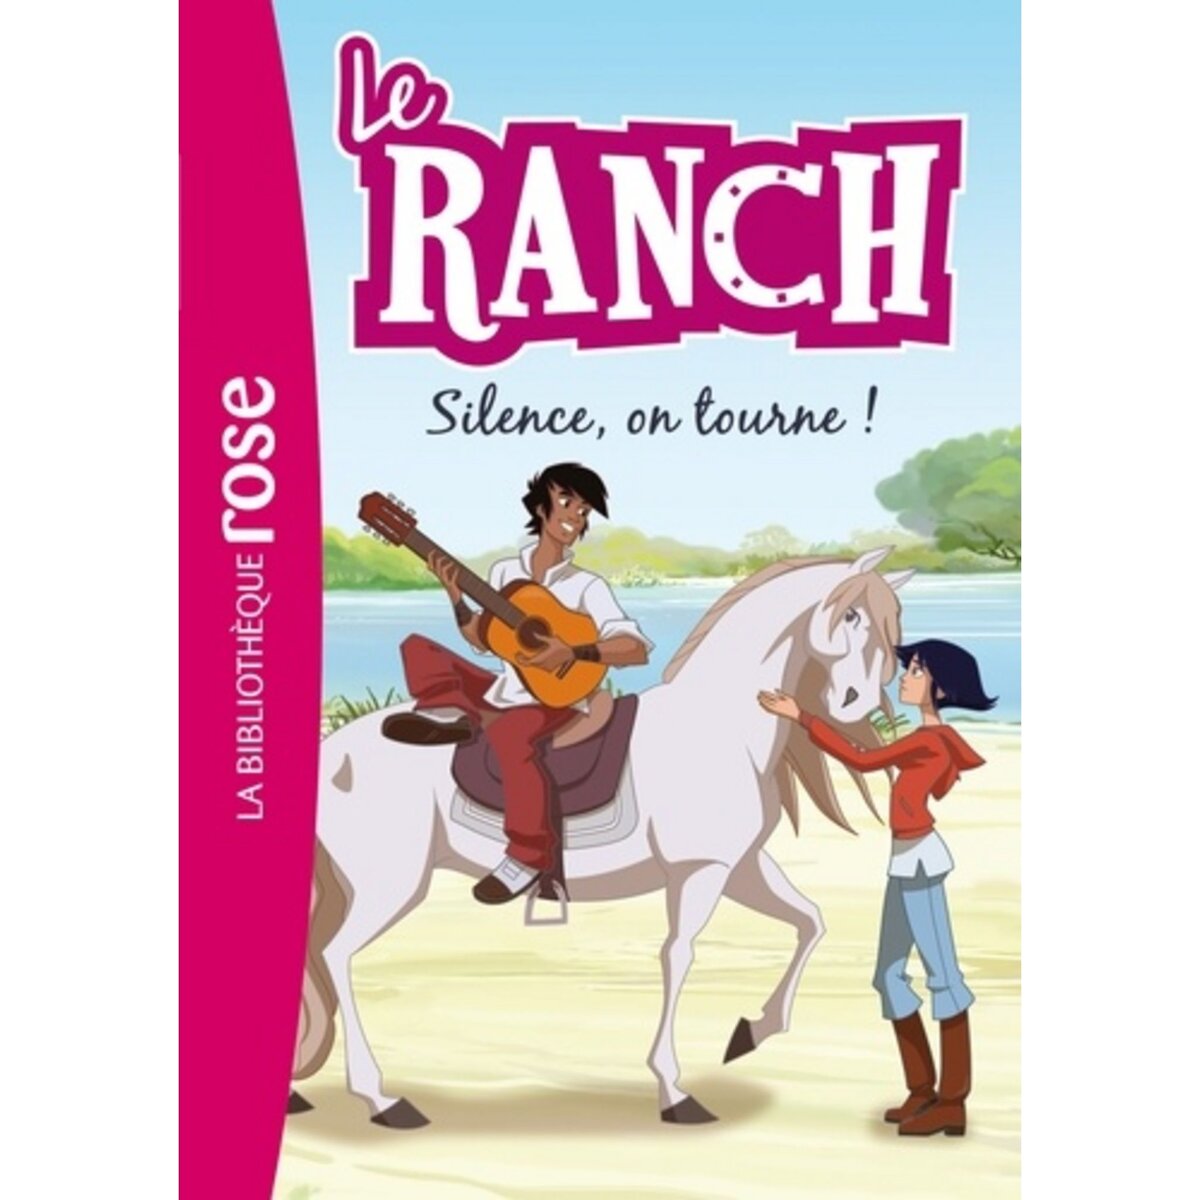  LE RANCH TOME 6 : SILENCE, ON TOURNE !, Chatel Christelle